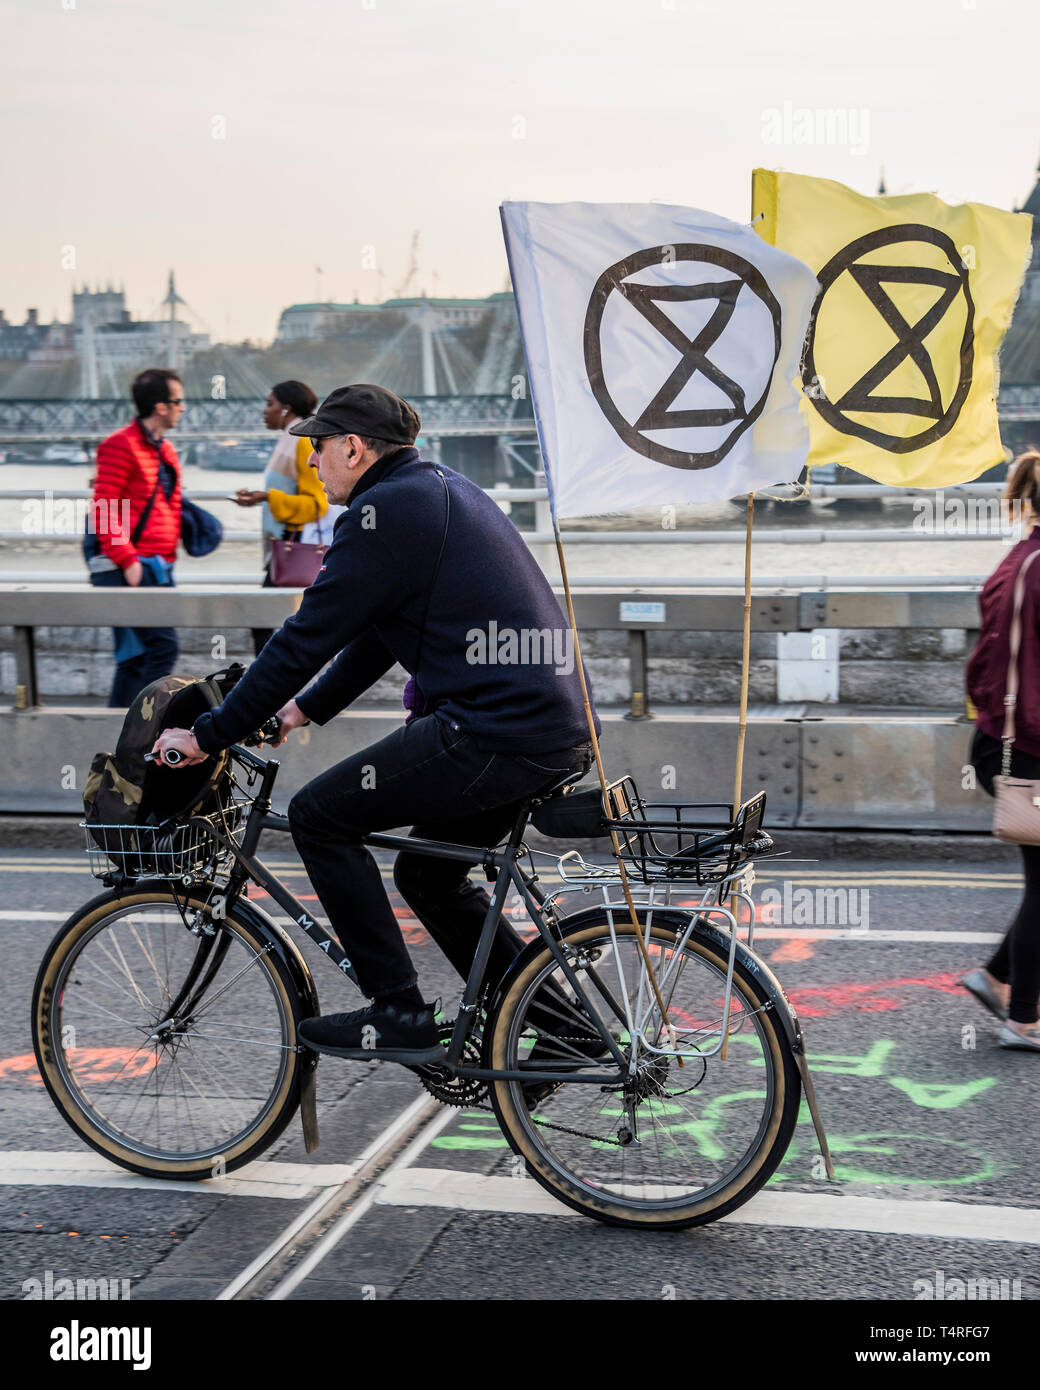 London, UK. 18th Apr 2019. Evening and the festival atmosphere returns - Day 4 - Protestors from Extinction Rebellion block several junctions in London as part of their ongoing protest to demand action by the UK Government on the 'climate chrisis'. The action is part of an international co-ordinated protest. Credit: Guy Bell/Alamy Live News Stock Photo